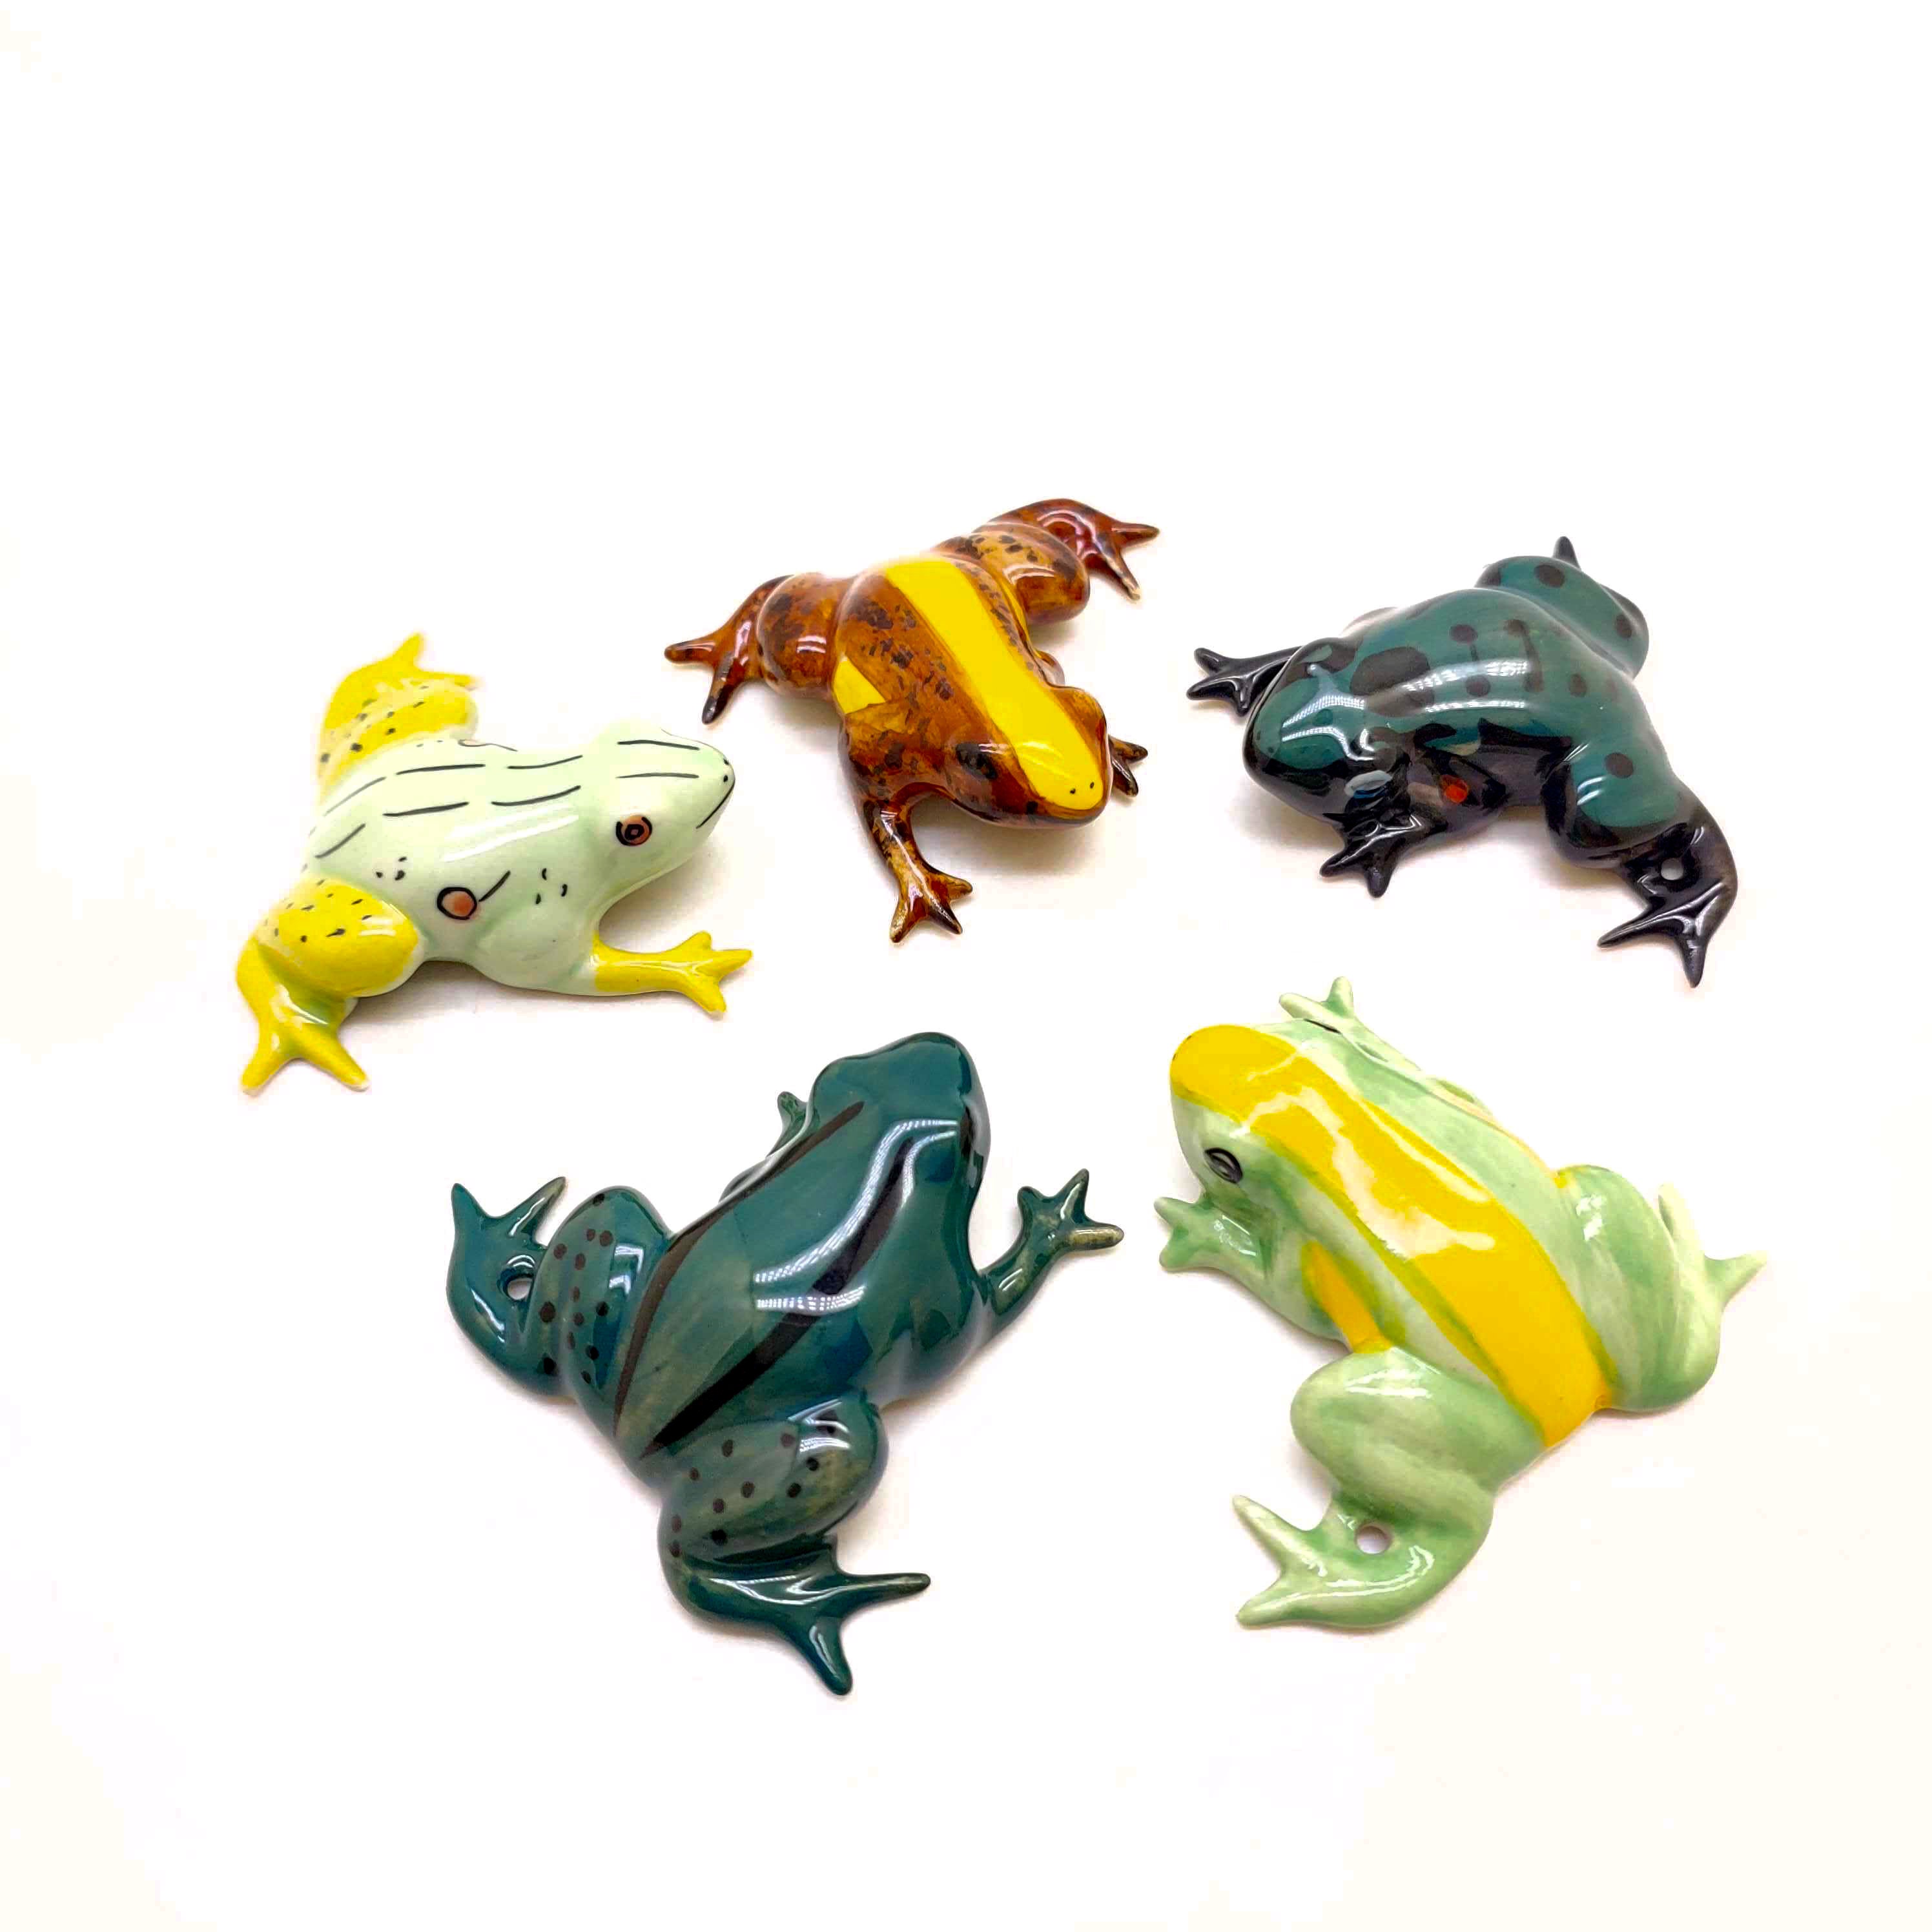 Mini Frogs 200 Pack,Tiny Frogs 200 Pack,Mini Resin Frogs,Mini Resin Frogs  Bulk,Miniature Resin Mini Frogs Green Frog (Pink,200 PCS)